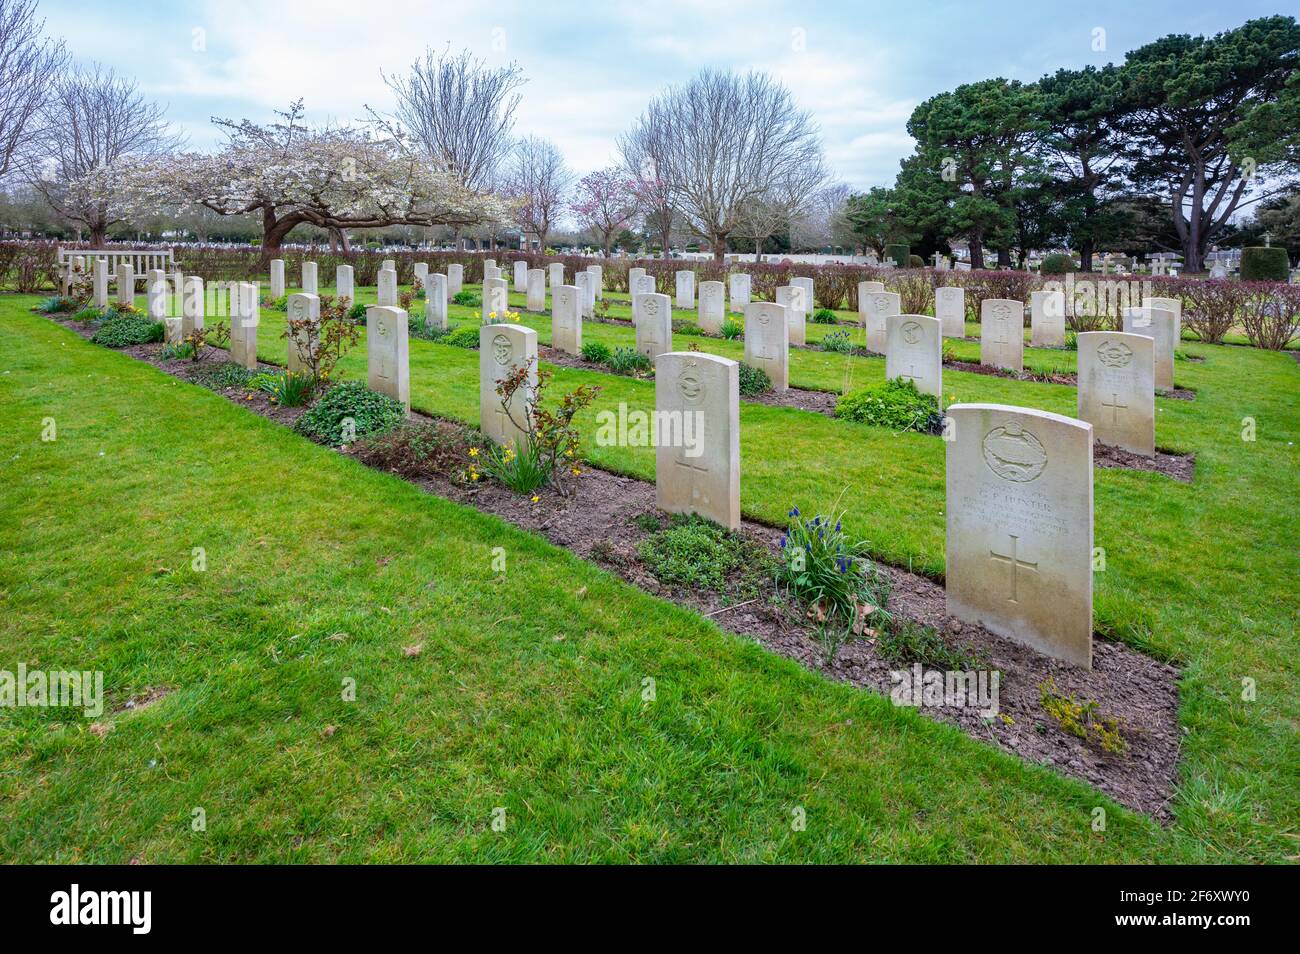 Commonwealth War Graves from first and second world wars in Littlehampton Cemetery in Littlehampton, West Sussex, England, UK. CWGC. Stock Photo